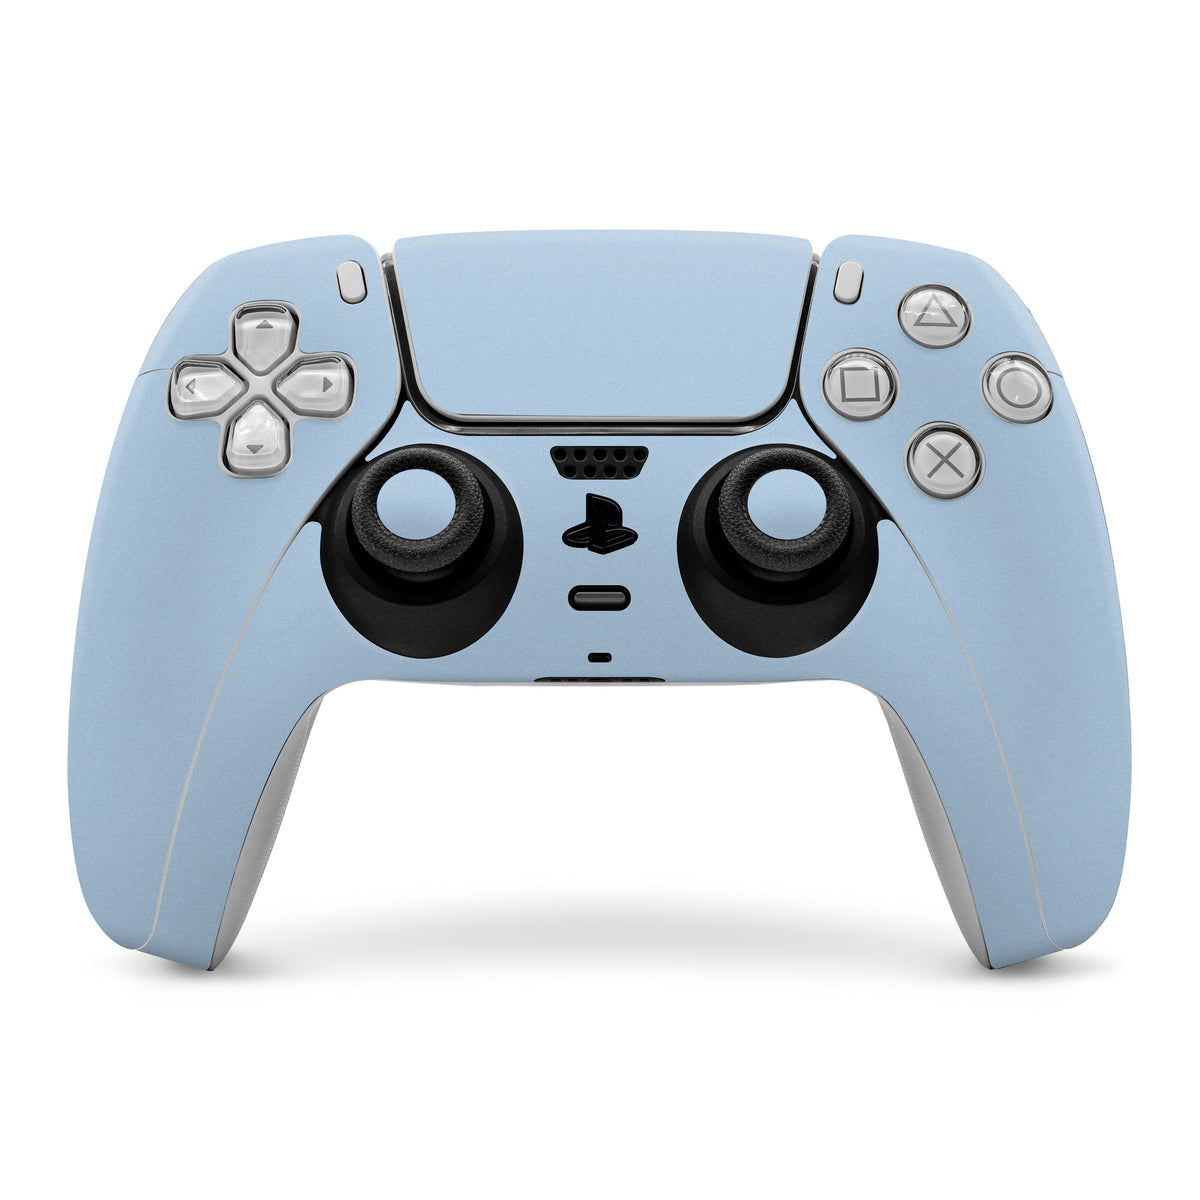 Solid State Blue Mist - Sony PS5 Controller Skin